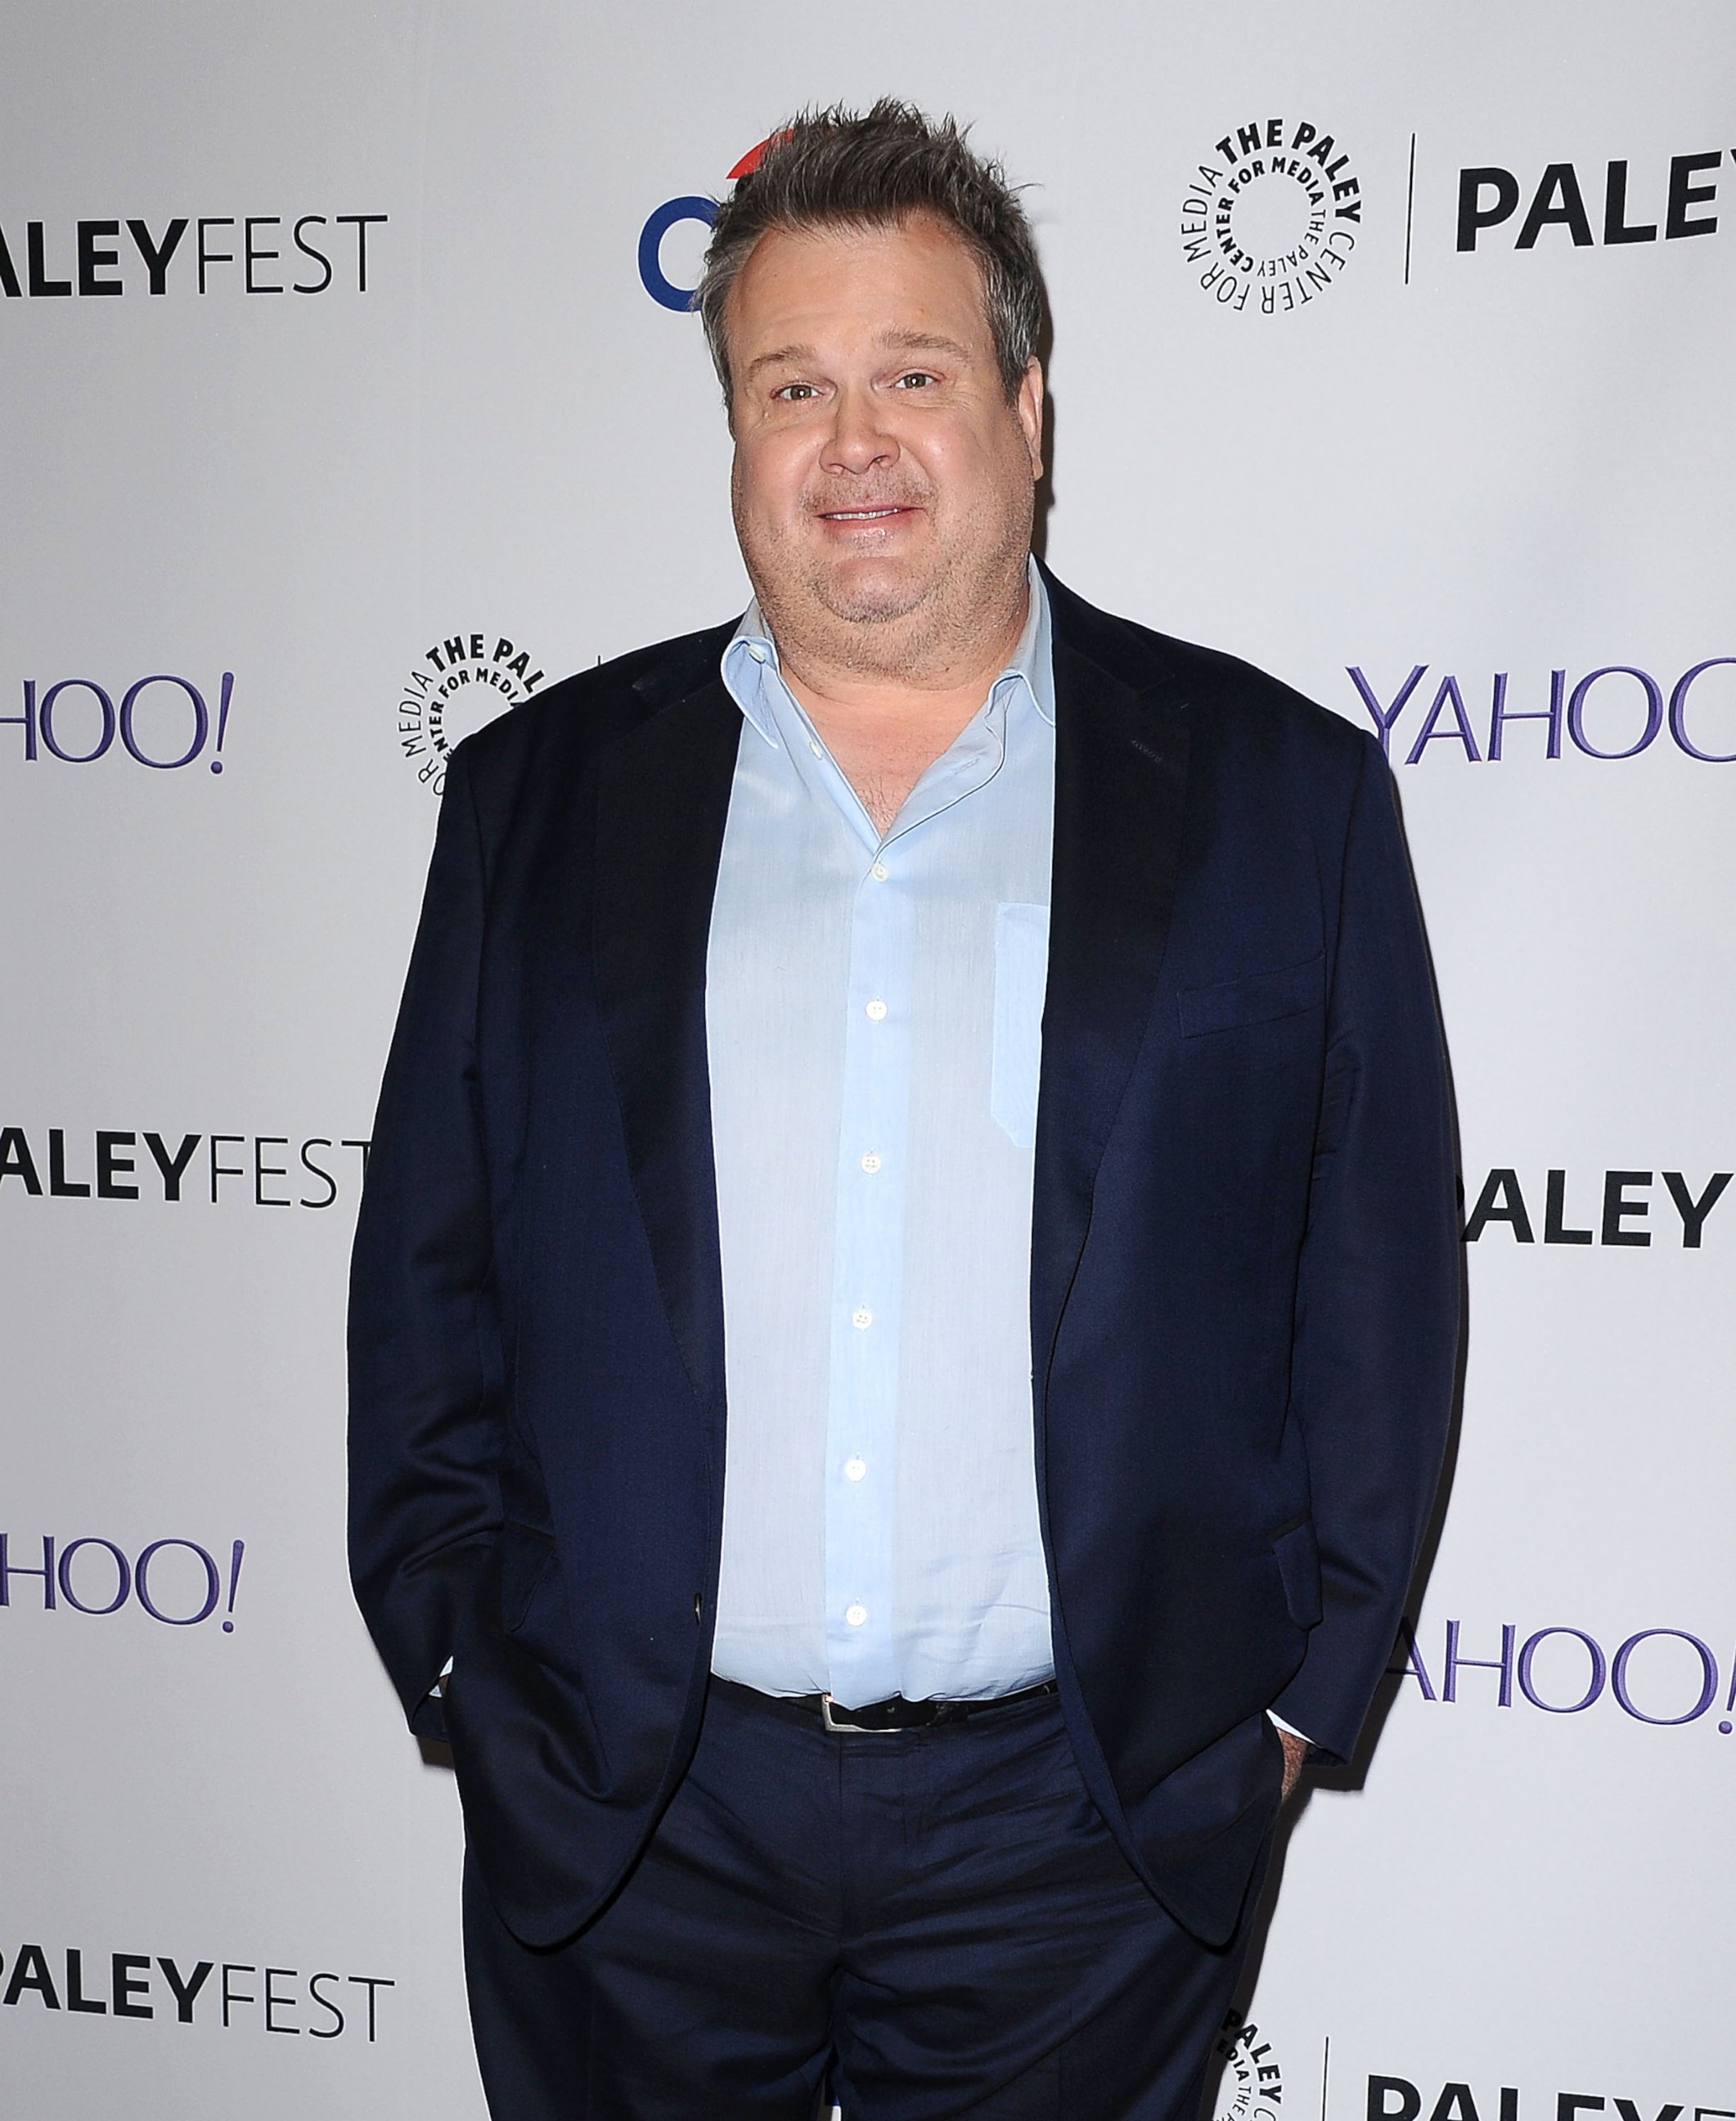 PHOTO: Eric Stonestreet attends the "Modern Family" event at the 32nd annual PaleyFest at Dolby Theatre on March 14, 2015 in Hollywood, Calif.